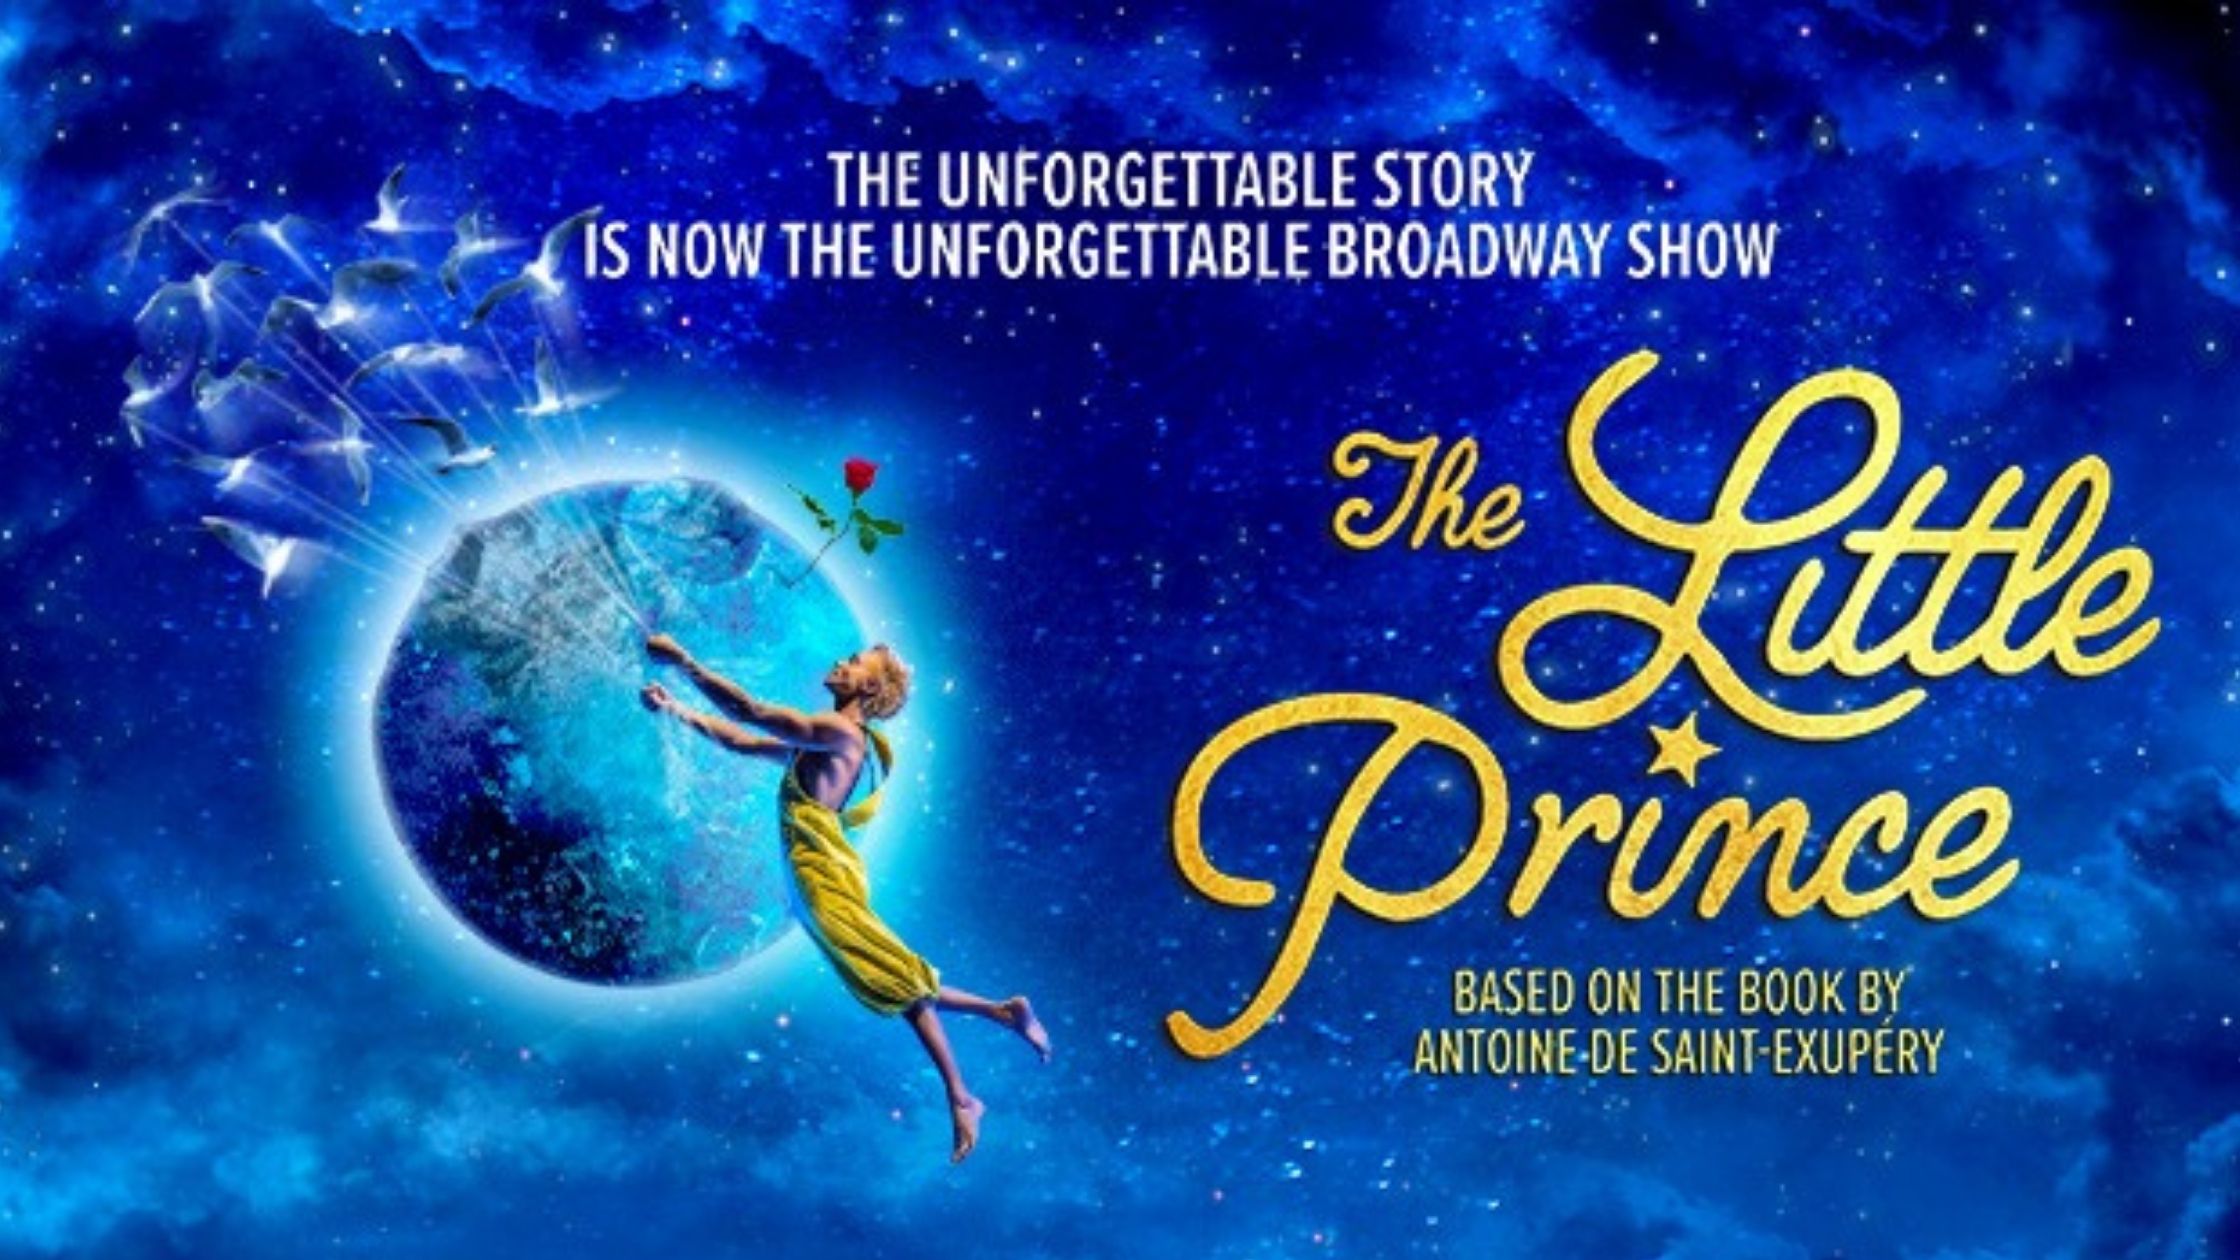 ‘The Little Prince’ Musical is Coming to Broadway